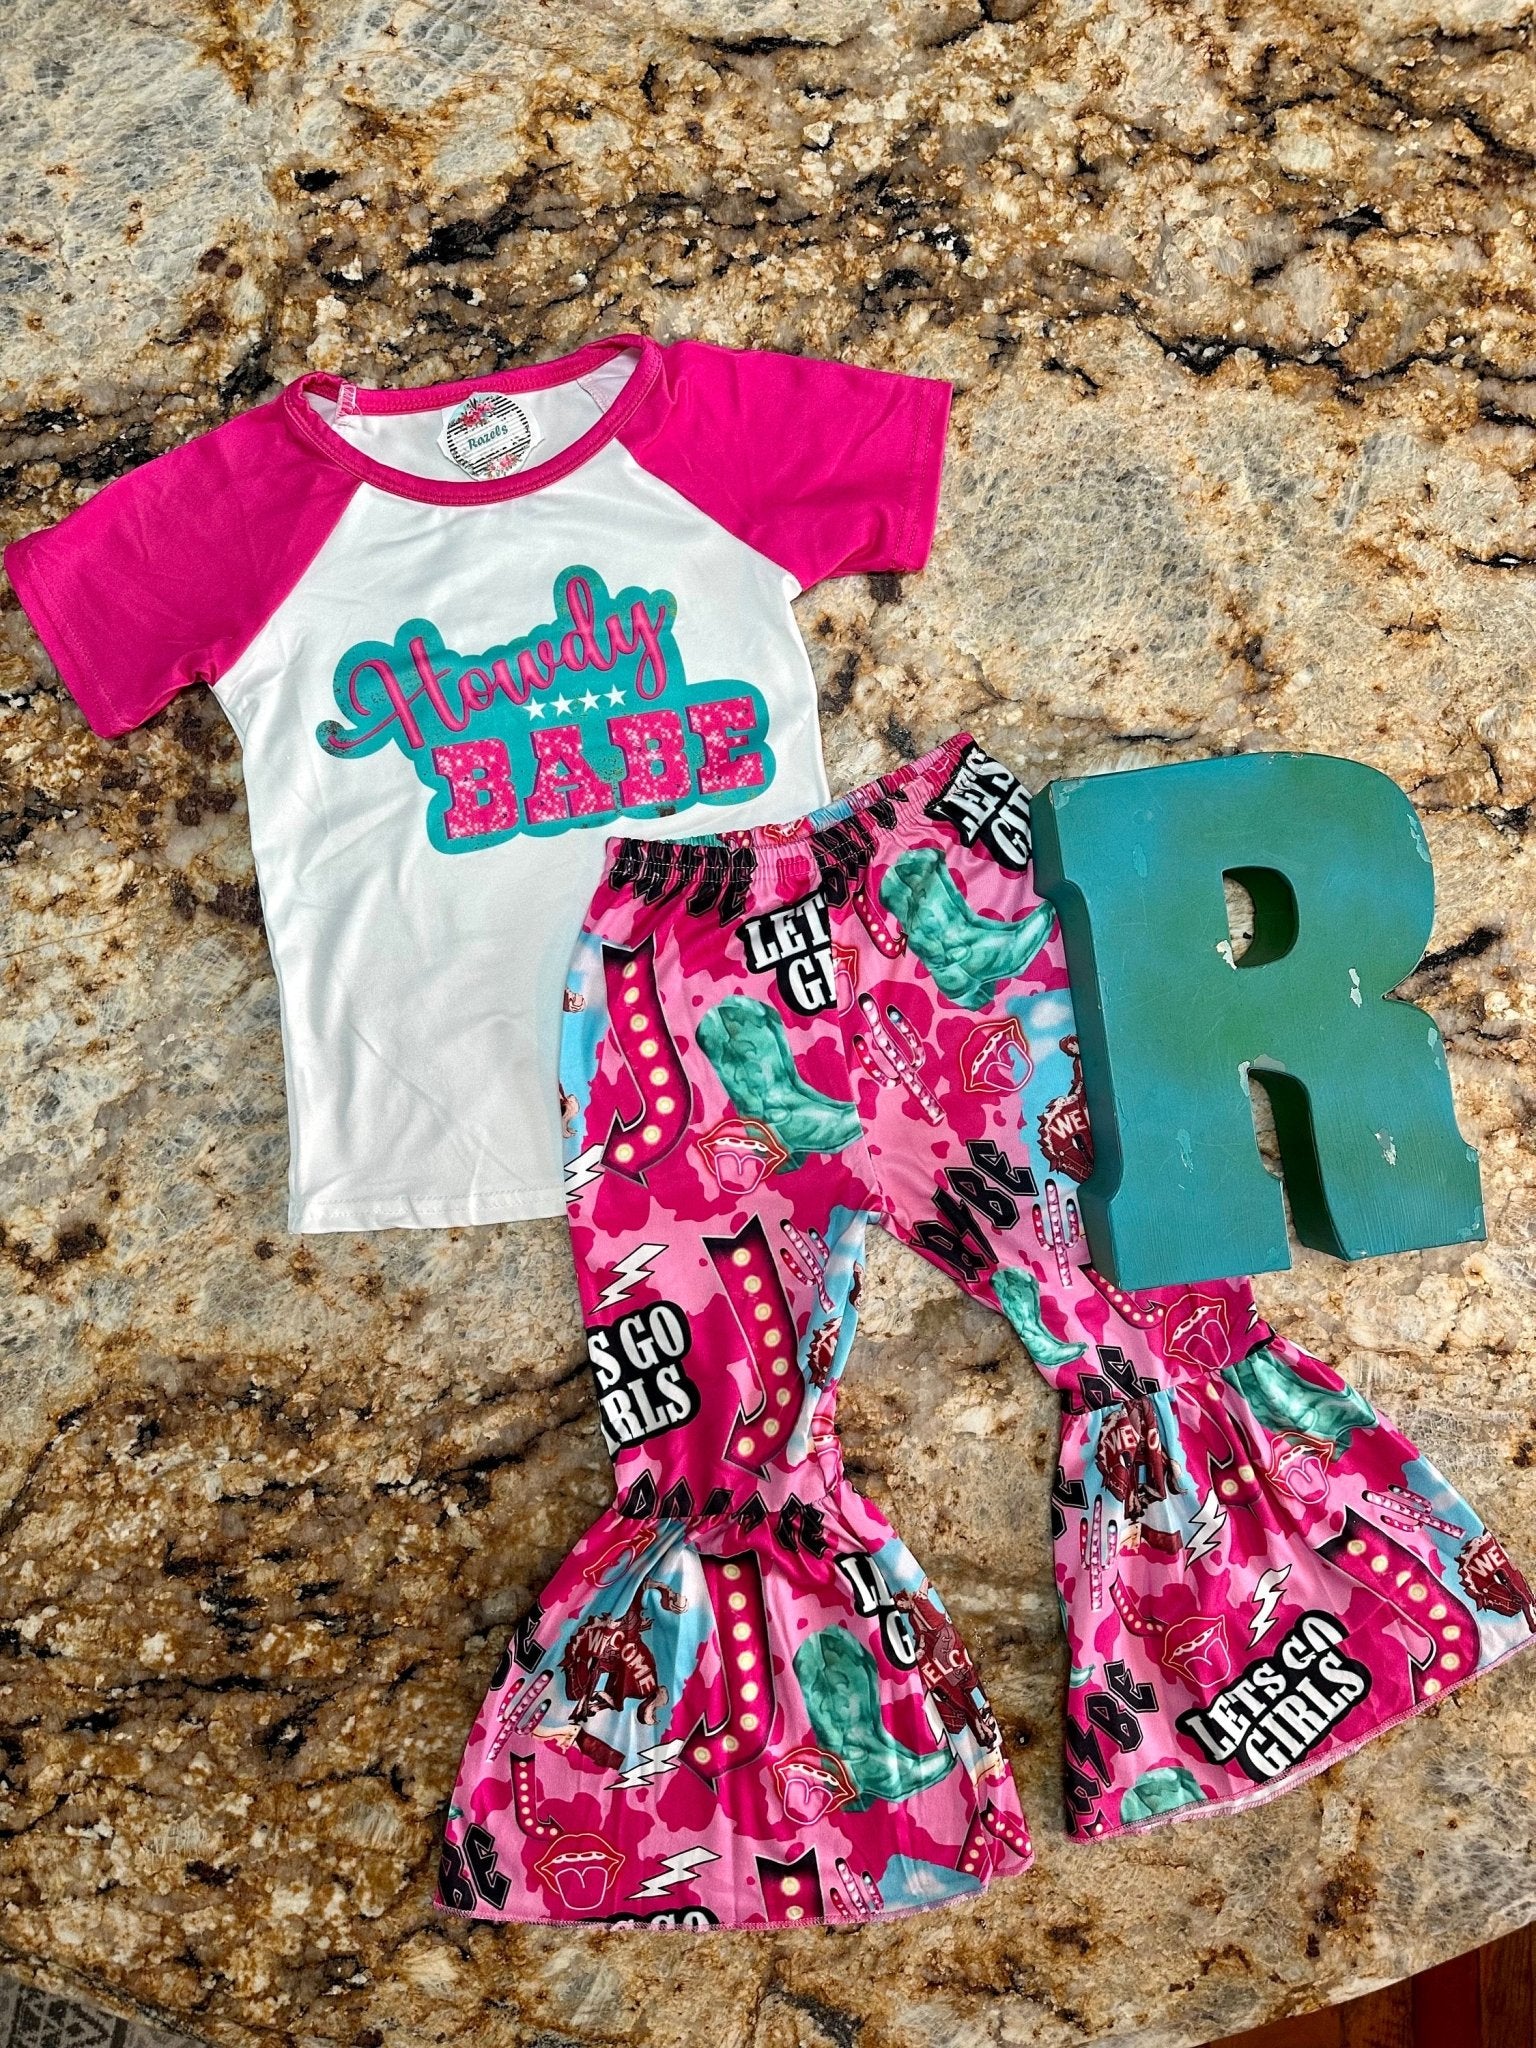 HOWDY BABE Cowgirl Bell Bottom Outfit, Pink Turquoise Let’s Go Girls Flares - Razels